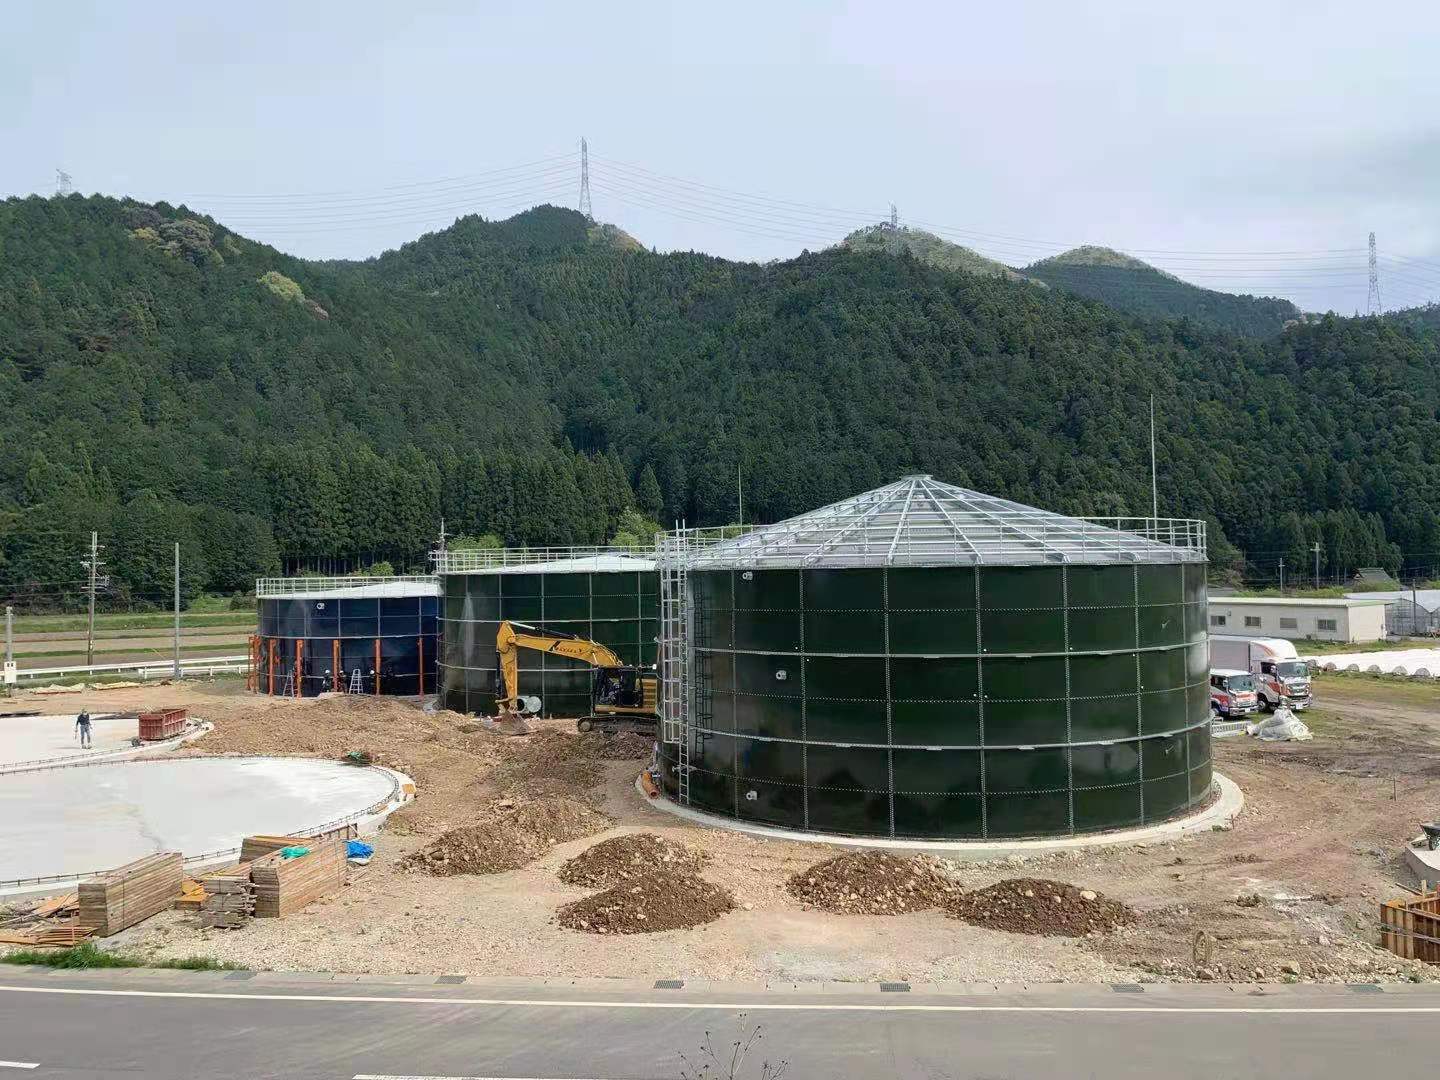 The Japanese water tank is nearing completion